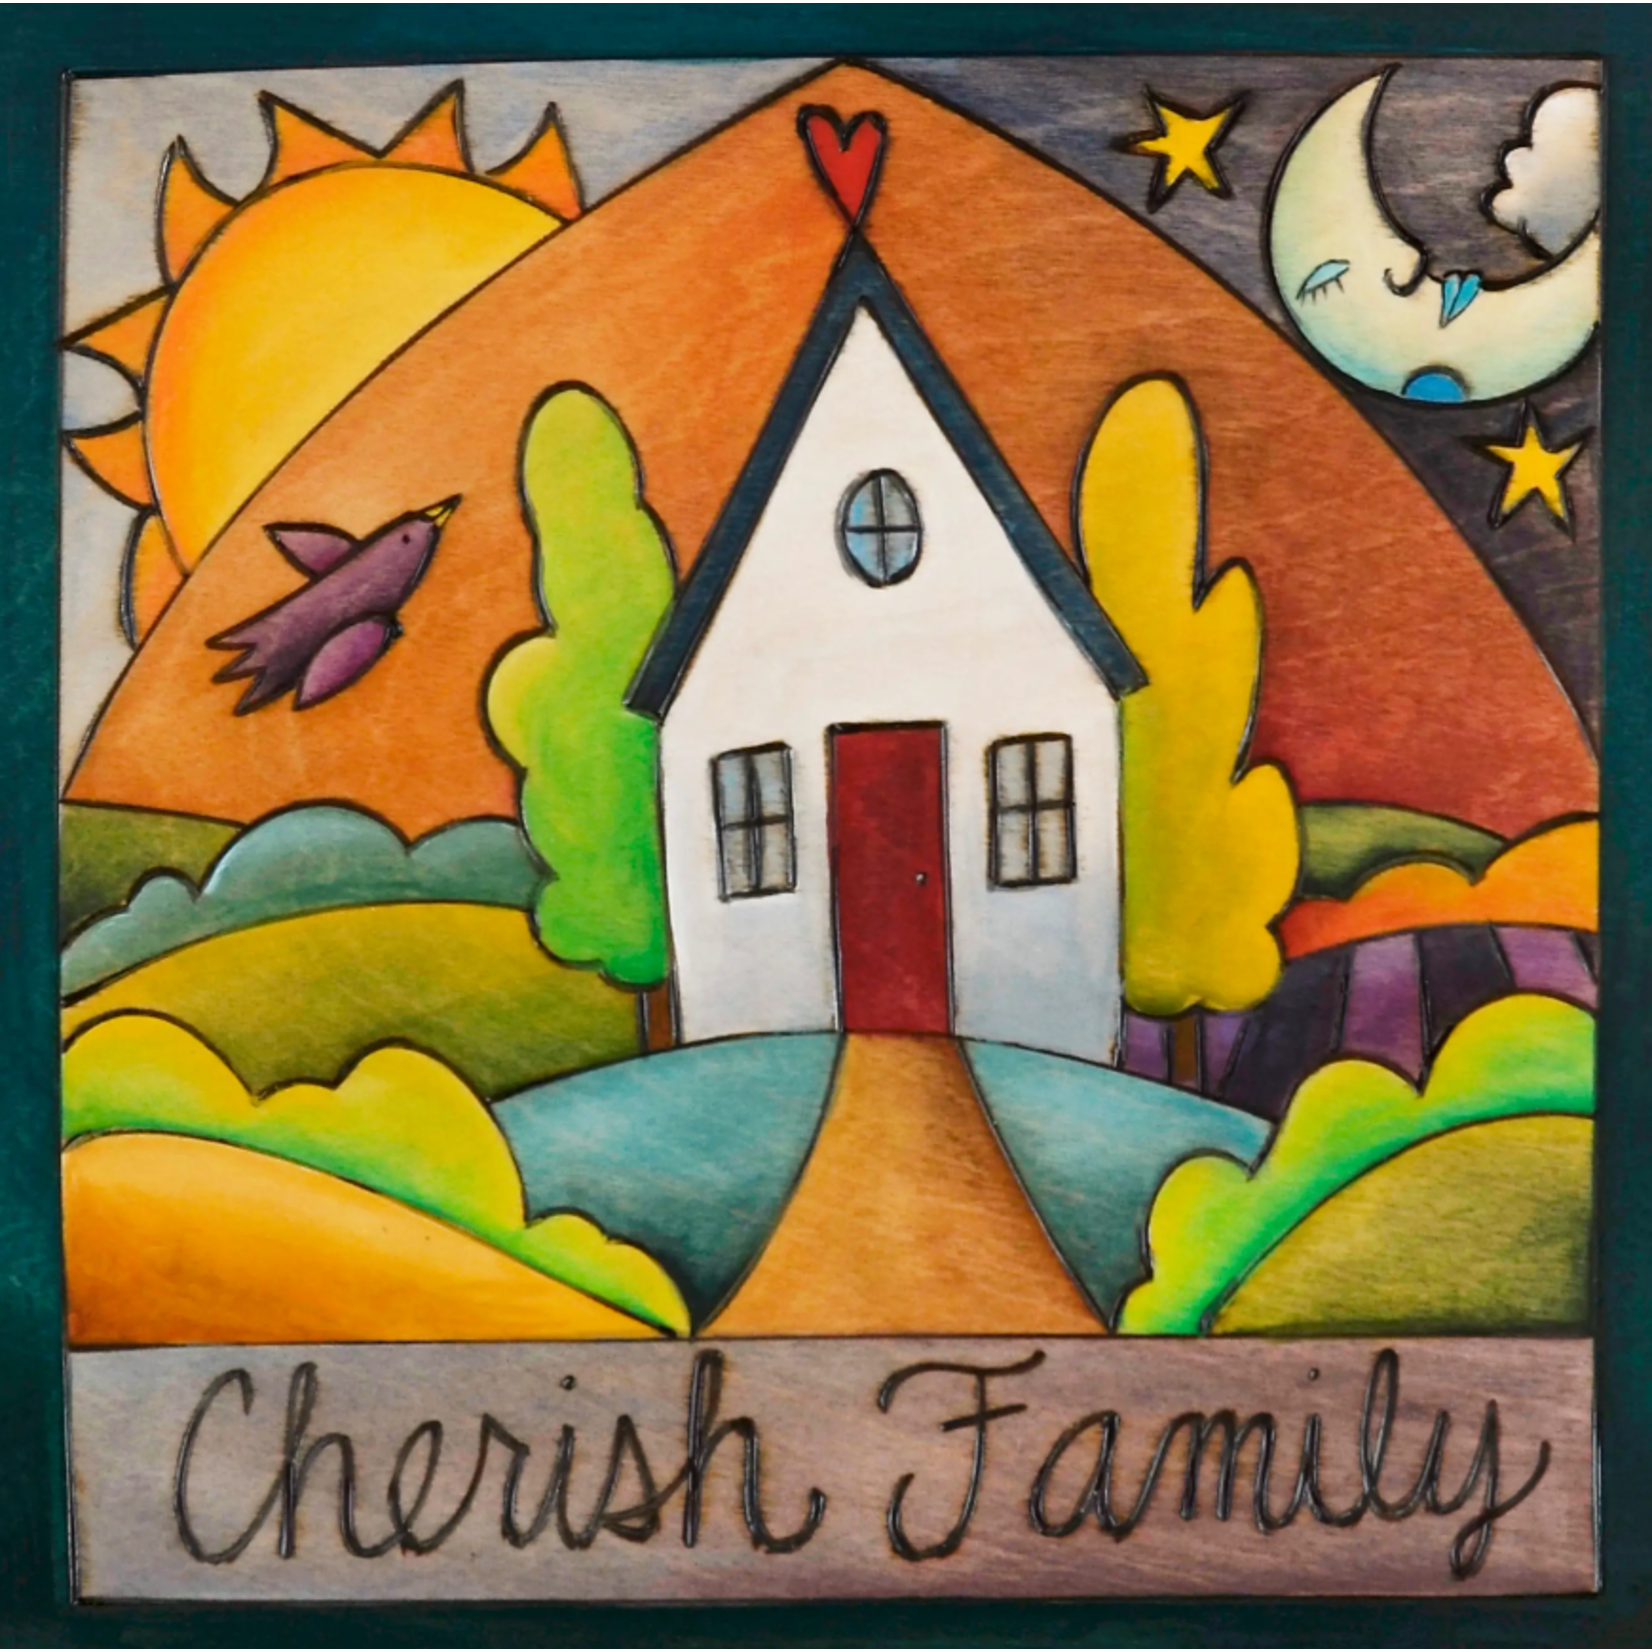 SINCERELY, STICKS FLY HOME WOOD WALL PLAQUE - "CHERISH FAMILY"